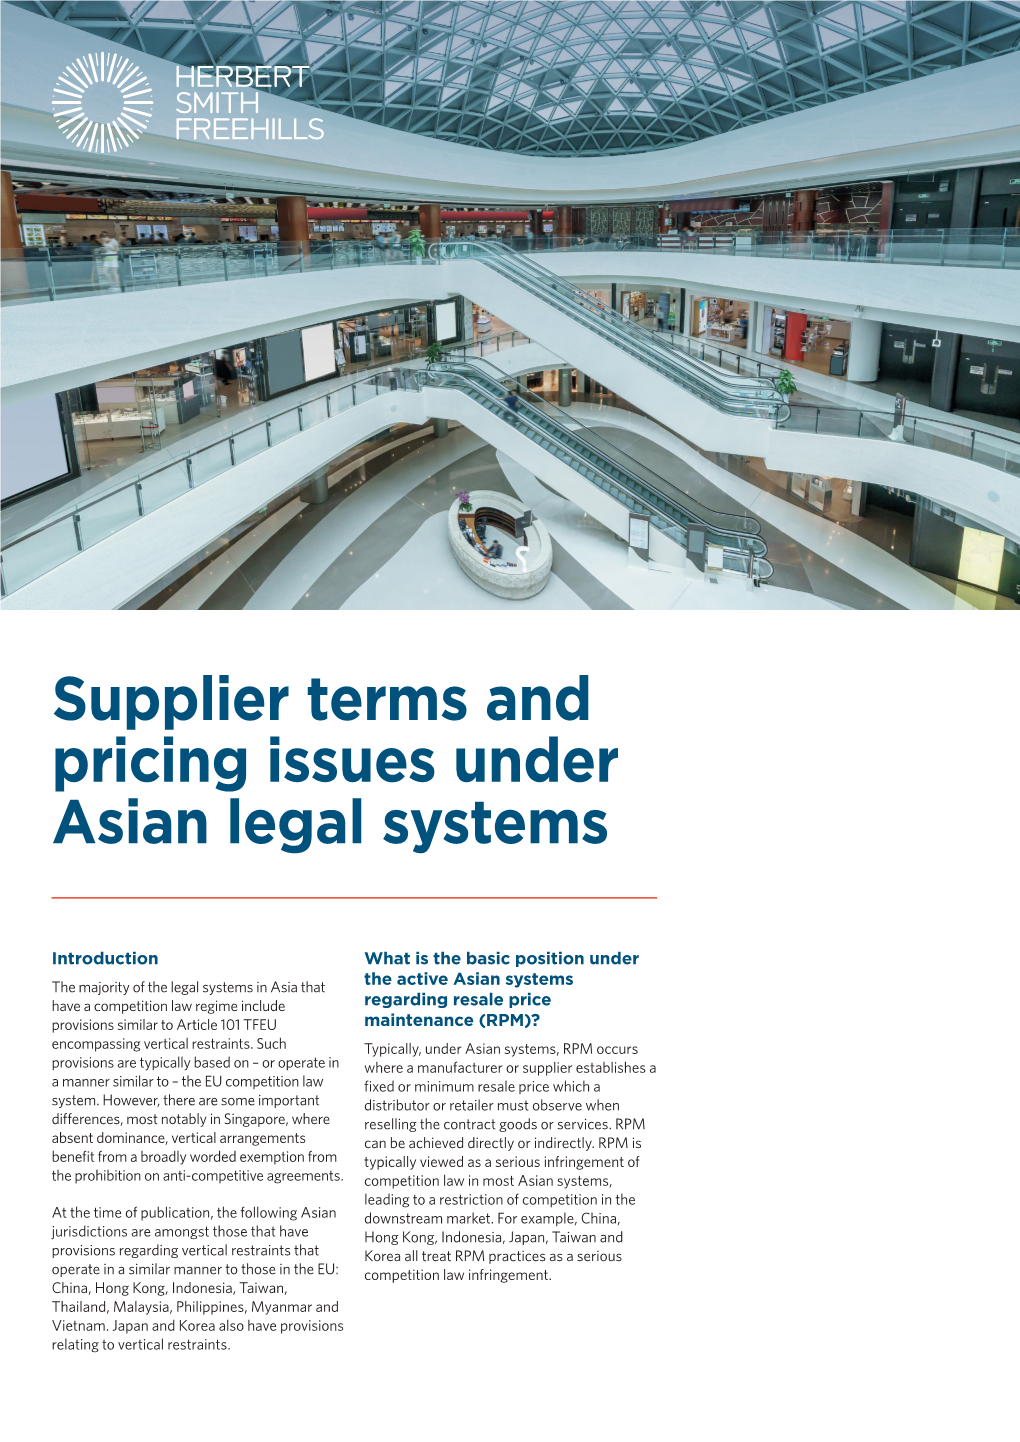 Supplier Terms and Pricing Issues Under Asian Legal Systems